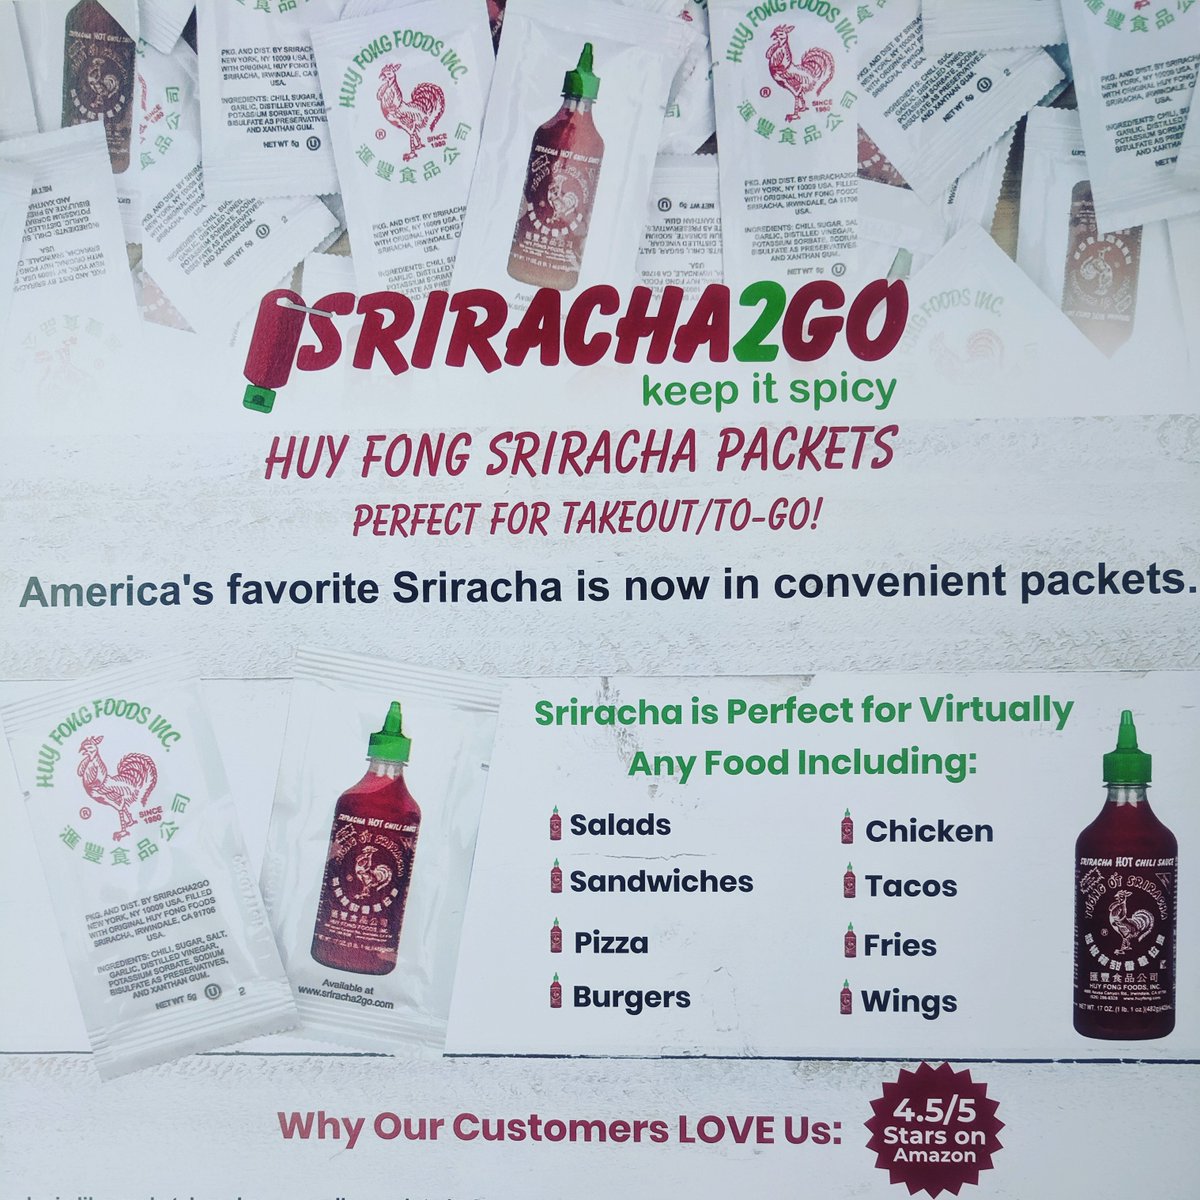 ICYMI! Huy Fong Sriracha Packets! Perfect for your spicy on-the-go lifestyle. 🔥🌶️🐓🔥🌶️🐓 Visit our site. @huyfongfoods #sriracha #srirachapackets #togo #huyfong #packets #travel #life #sriracha2go